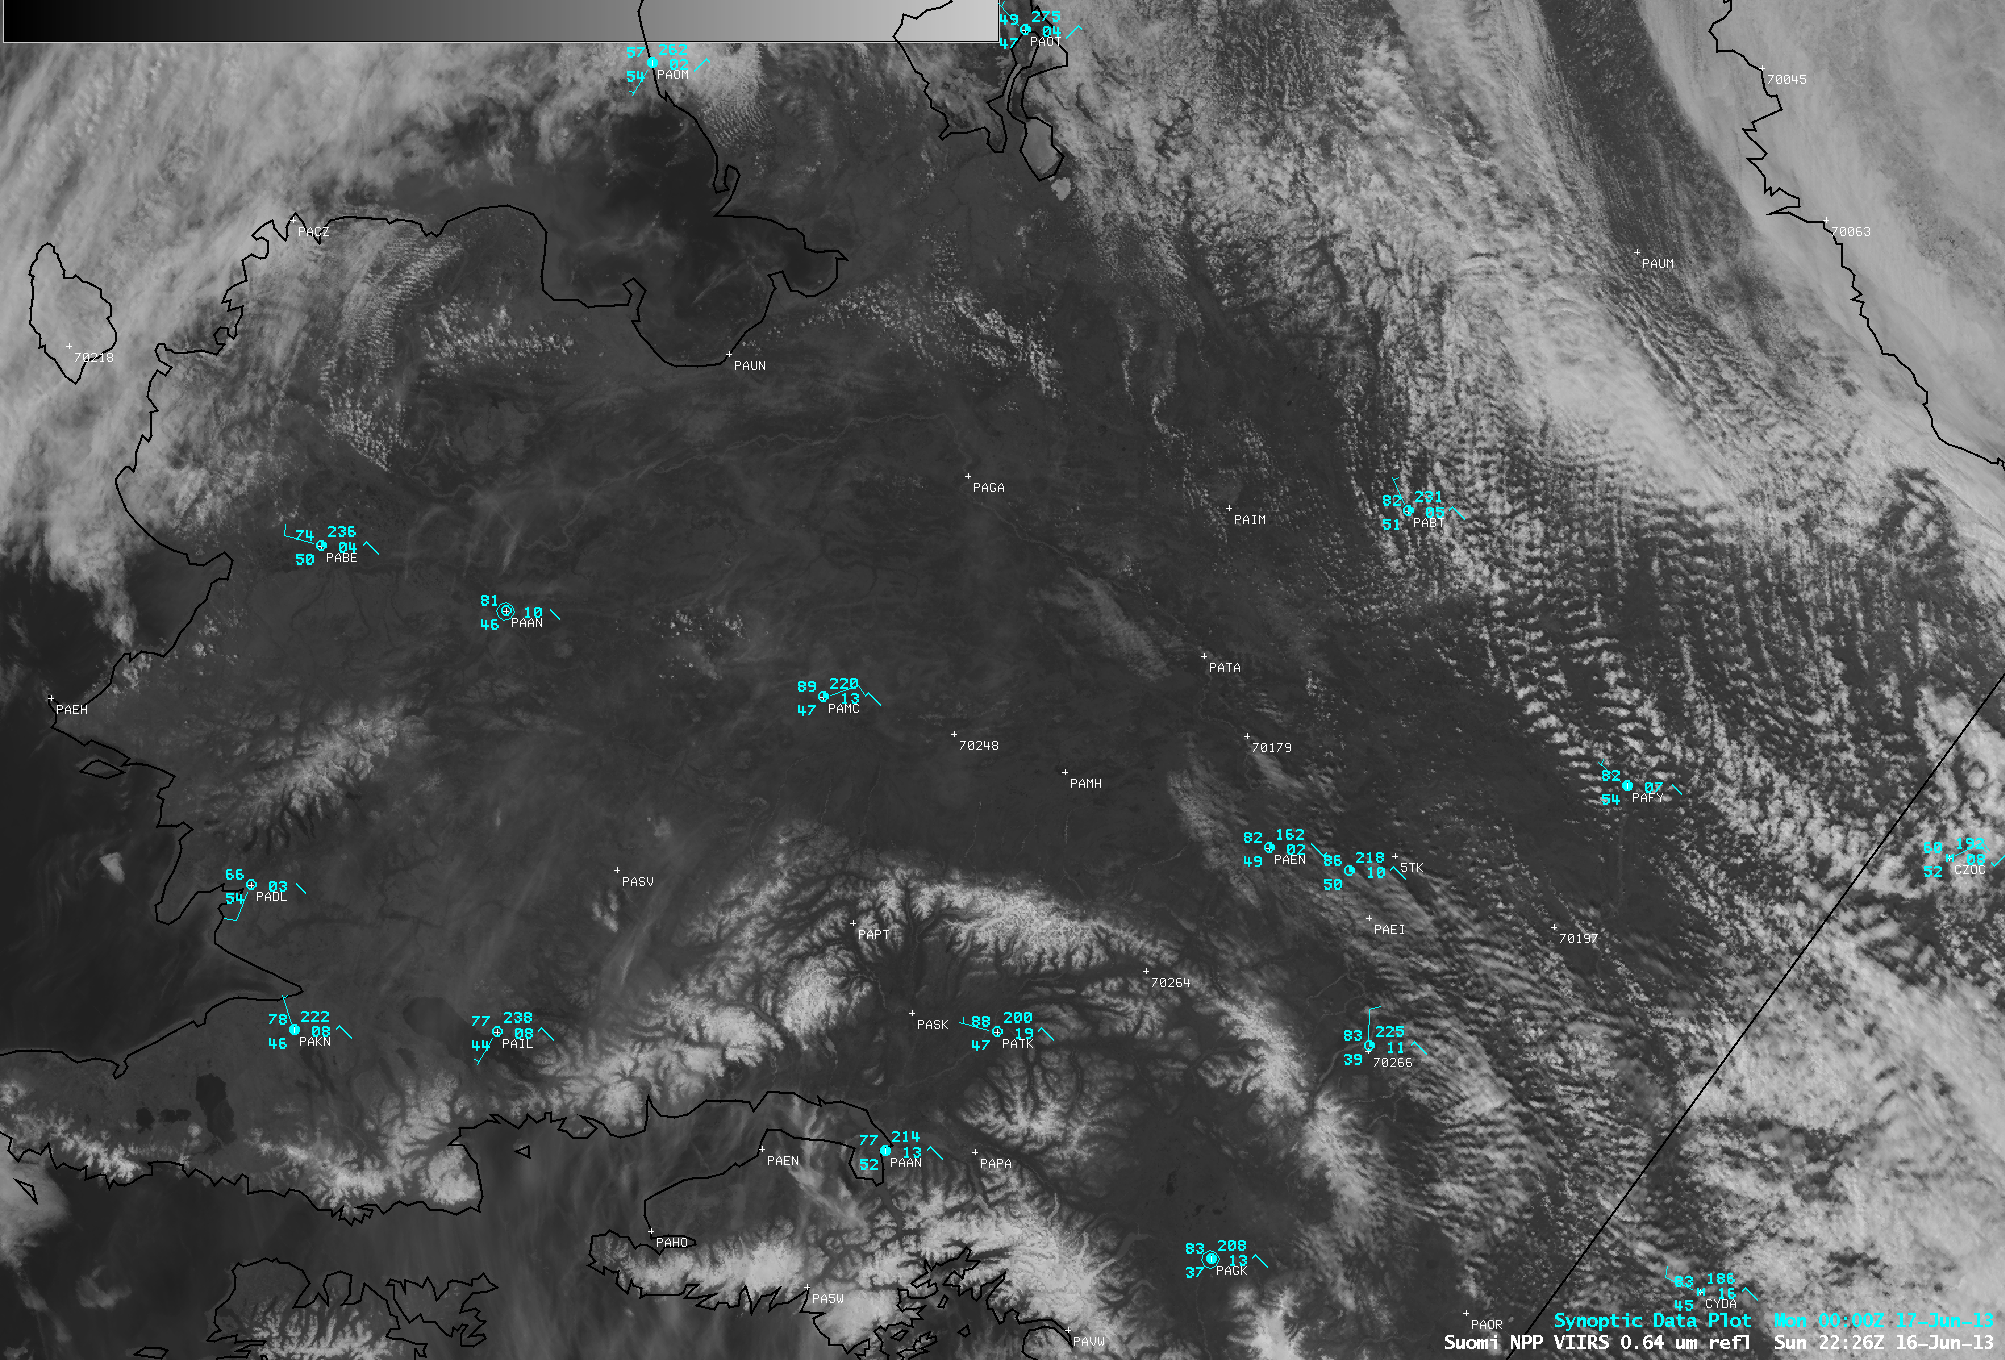 Suomi NPP VIIRS 0.64 Âµm visible channel and 3.74 Âµm shortwave IR channel images